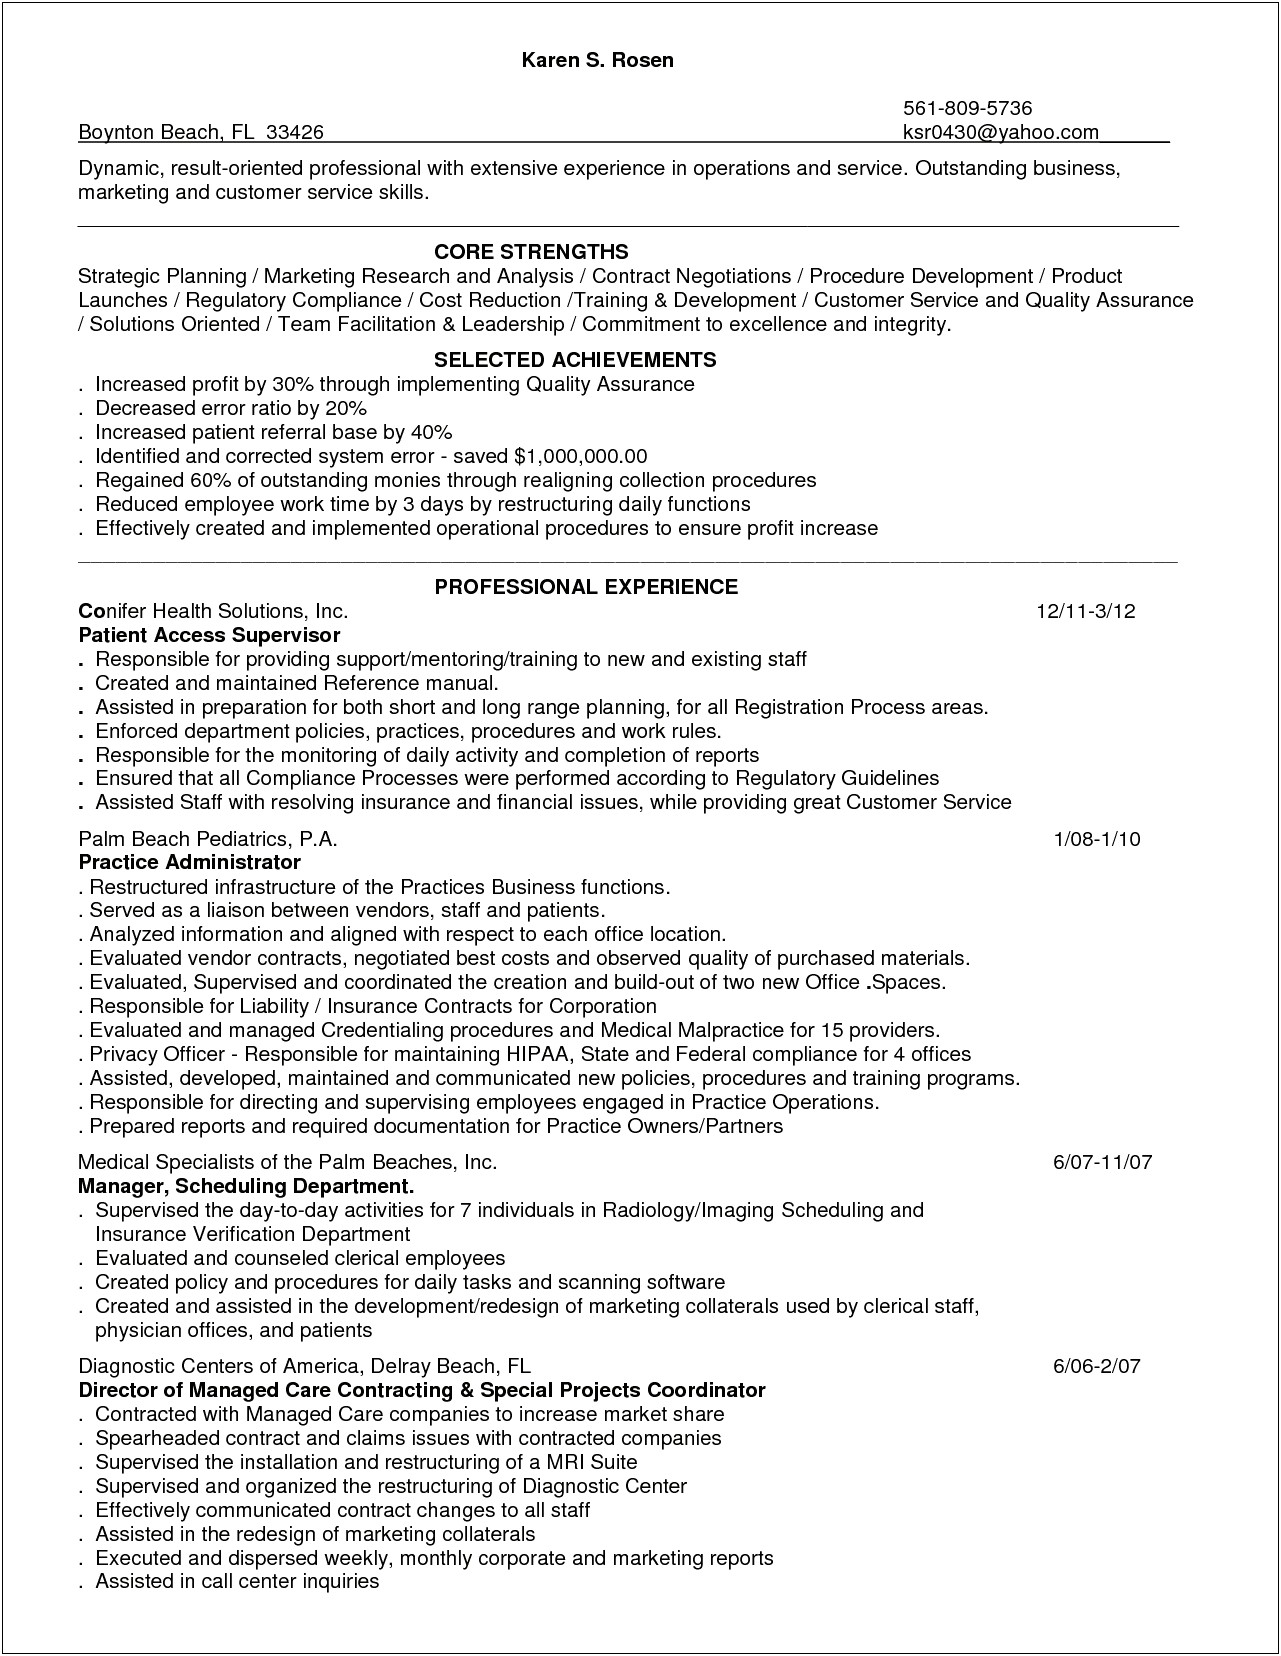 Patient Care Resume Objective Examples